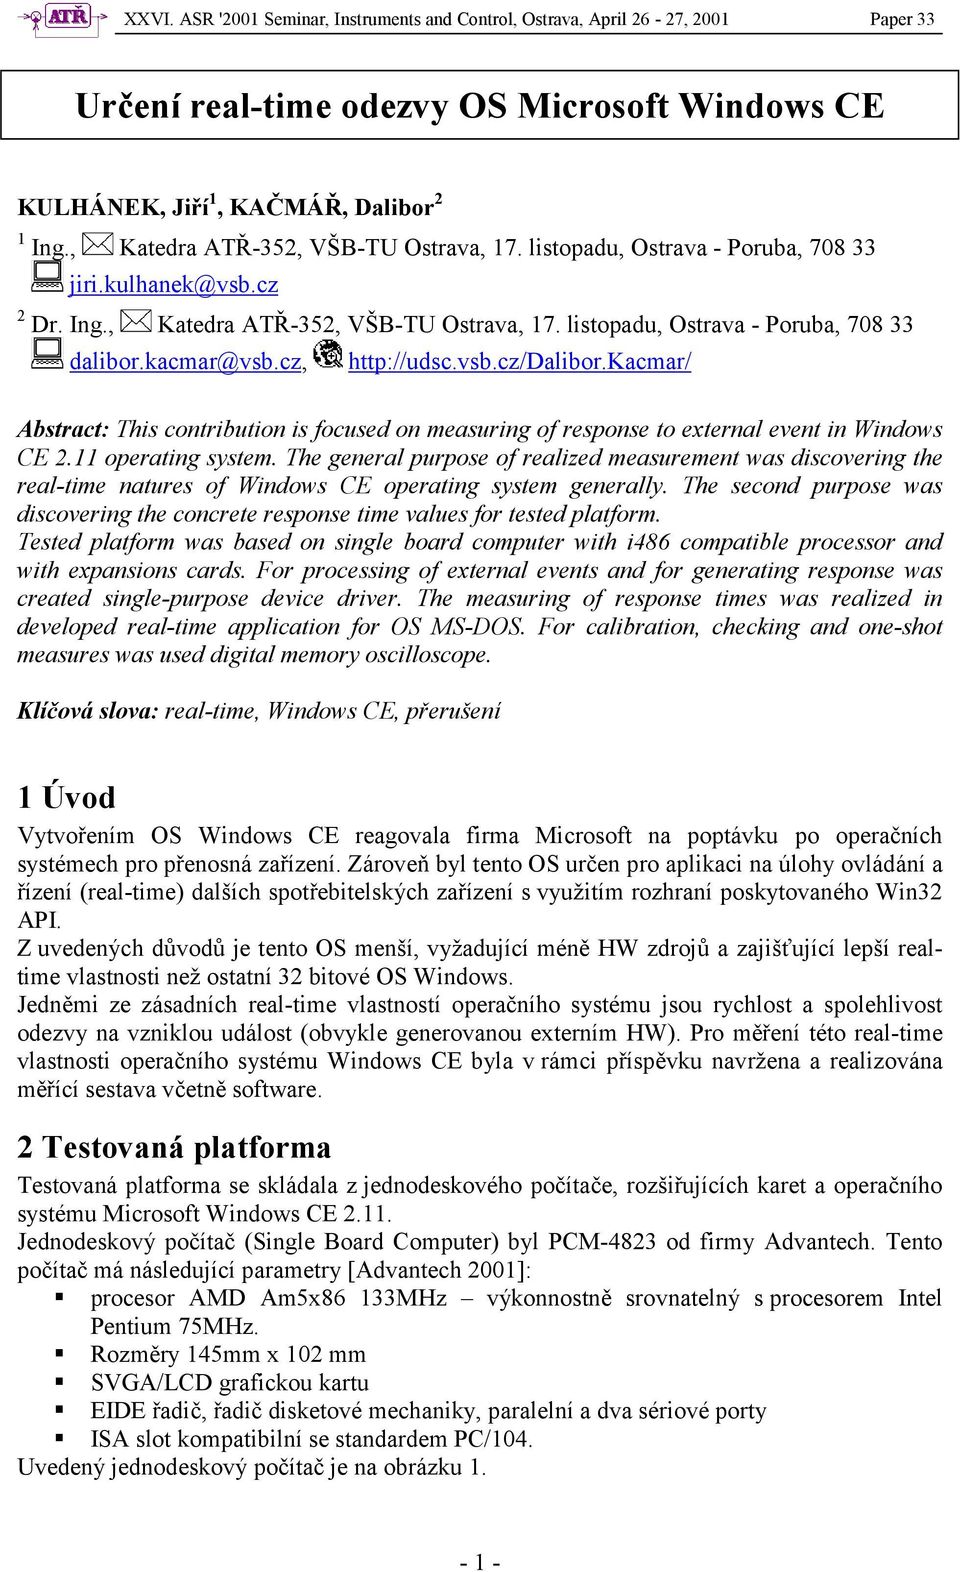 cz, http://udsc.vsb.cz/dalibor.kacmar/ Abstract: This contribution is focused on measuring of response to external event in Windows CE 2.11 operating system.